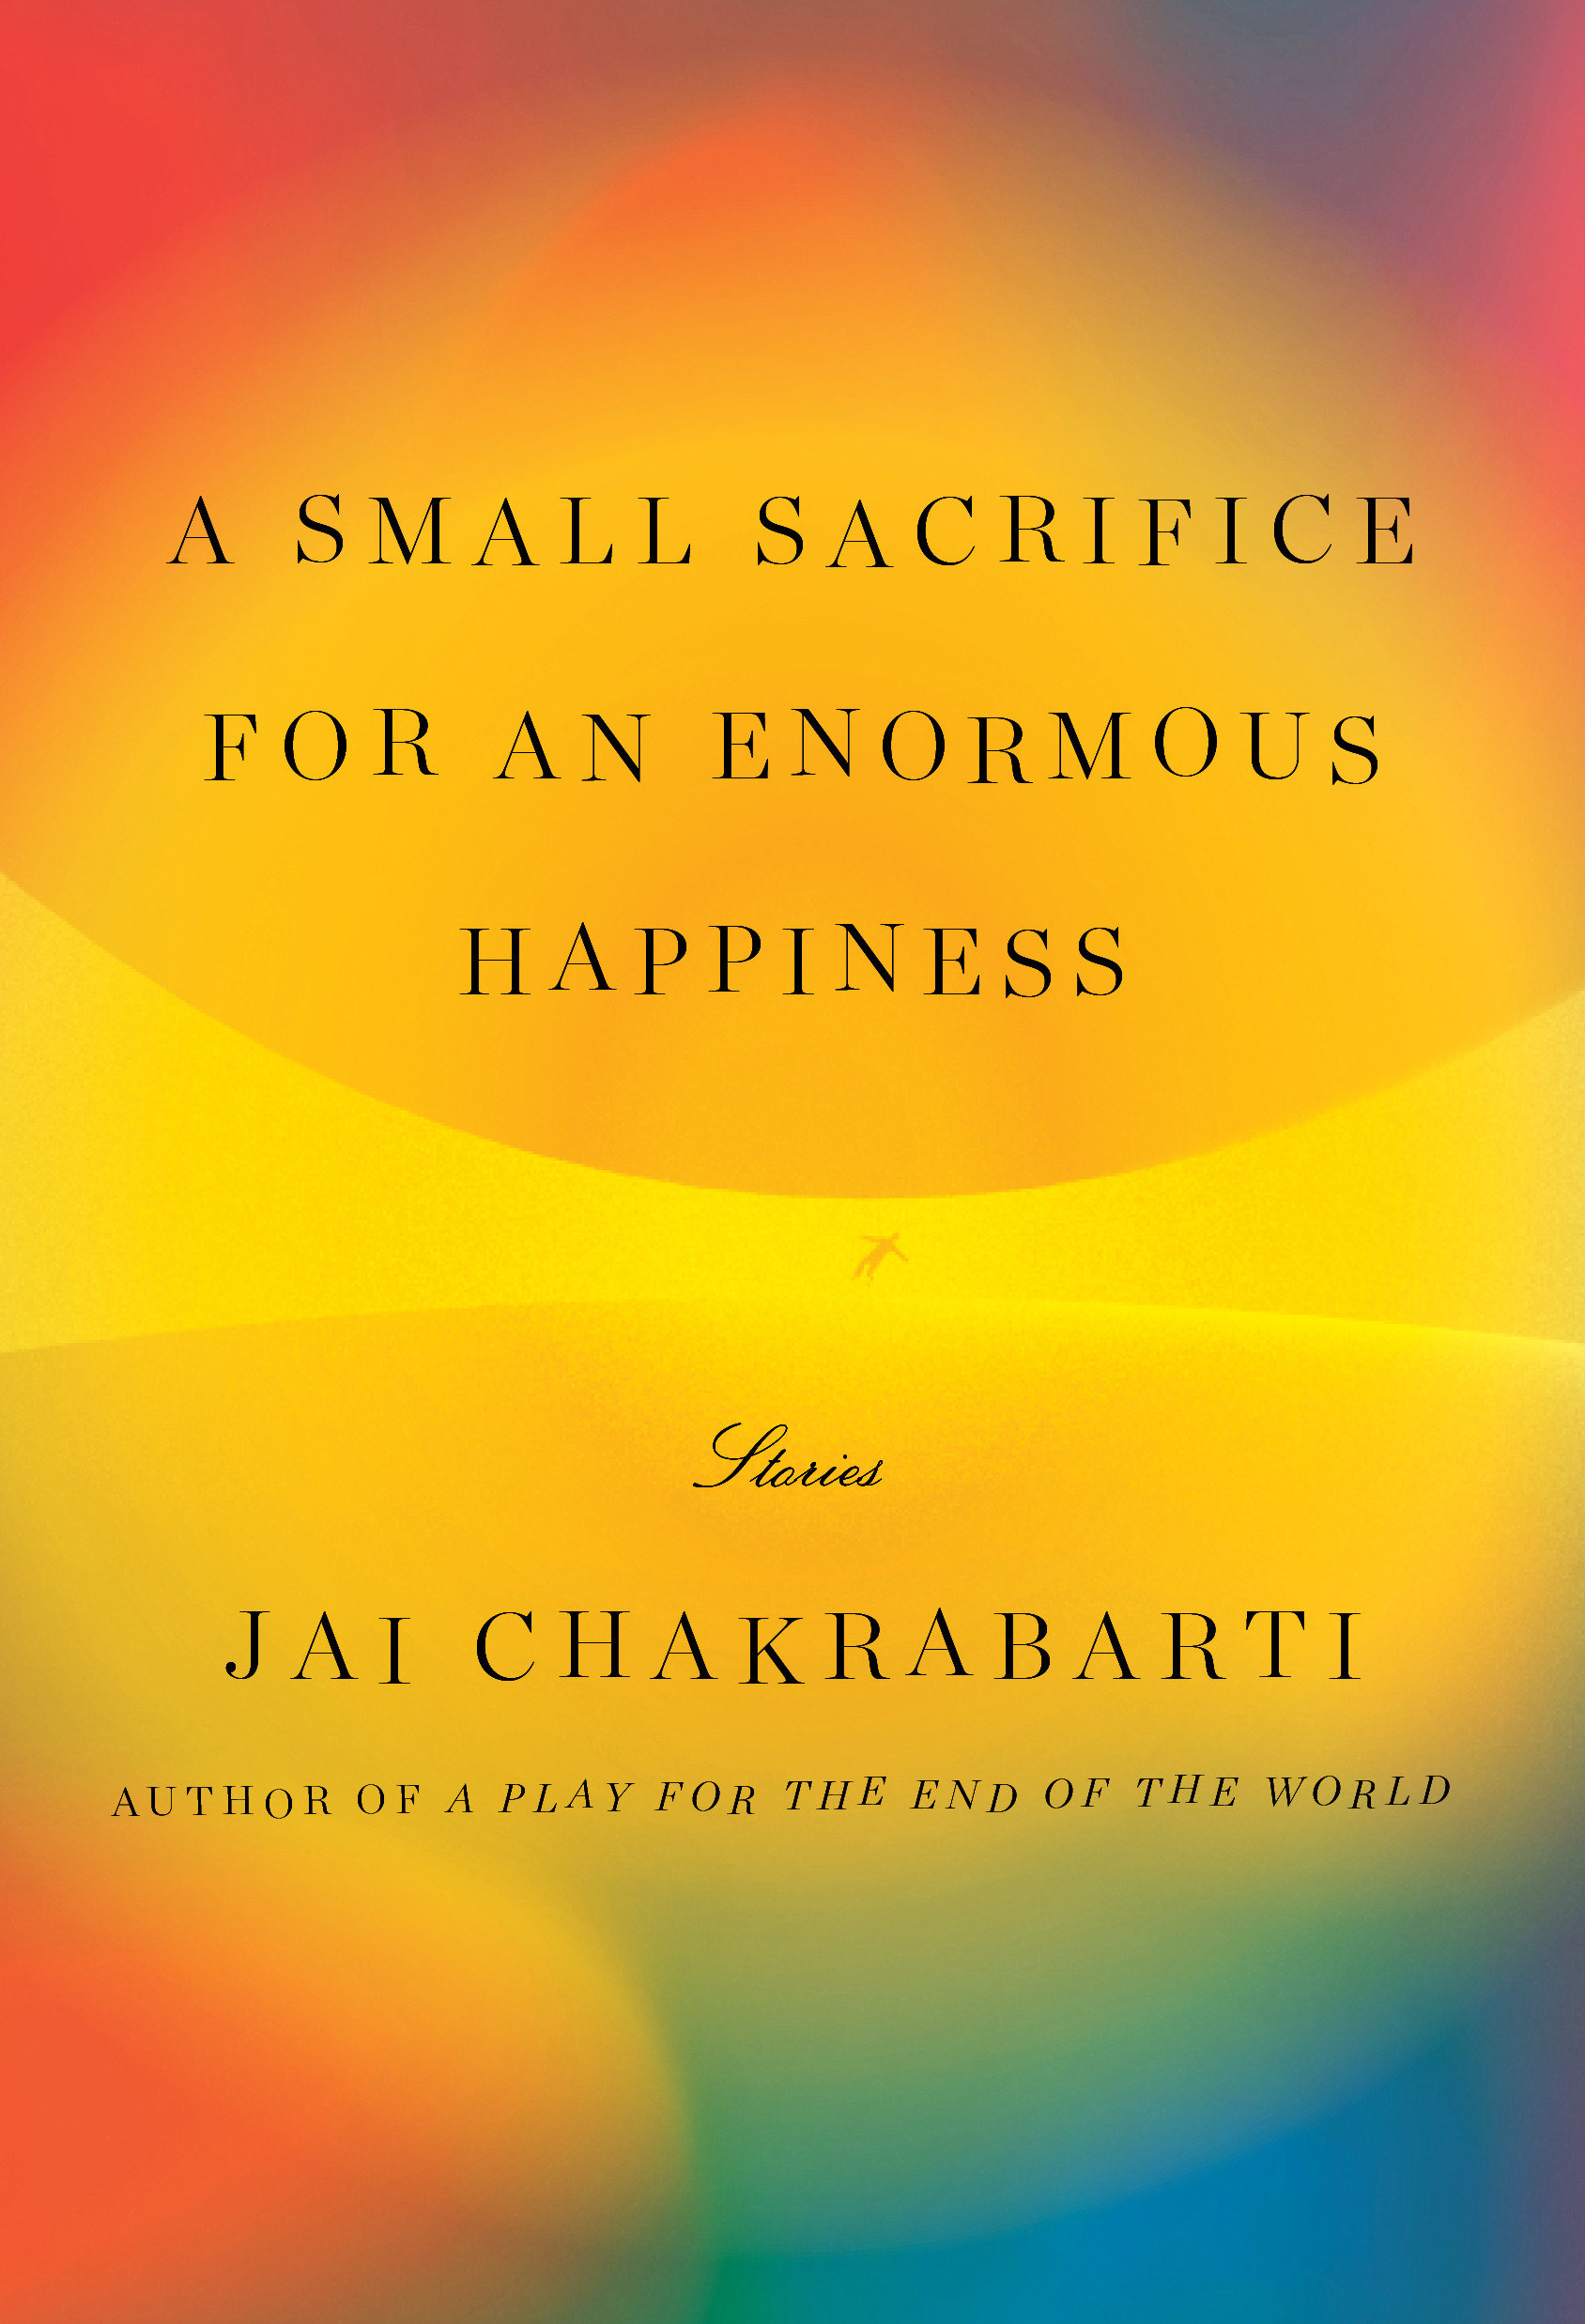 A Small Sacrifice for An Enormous Happiness (Hardcover Book)